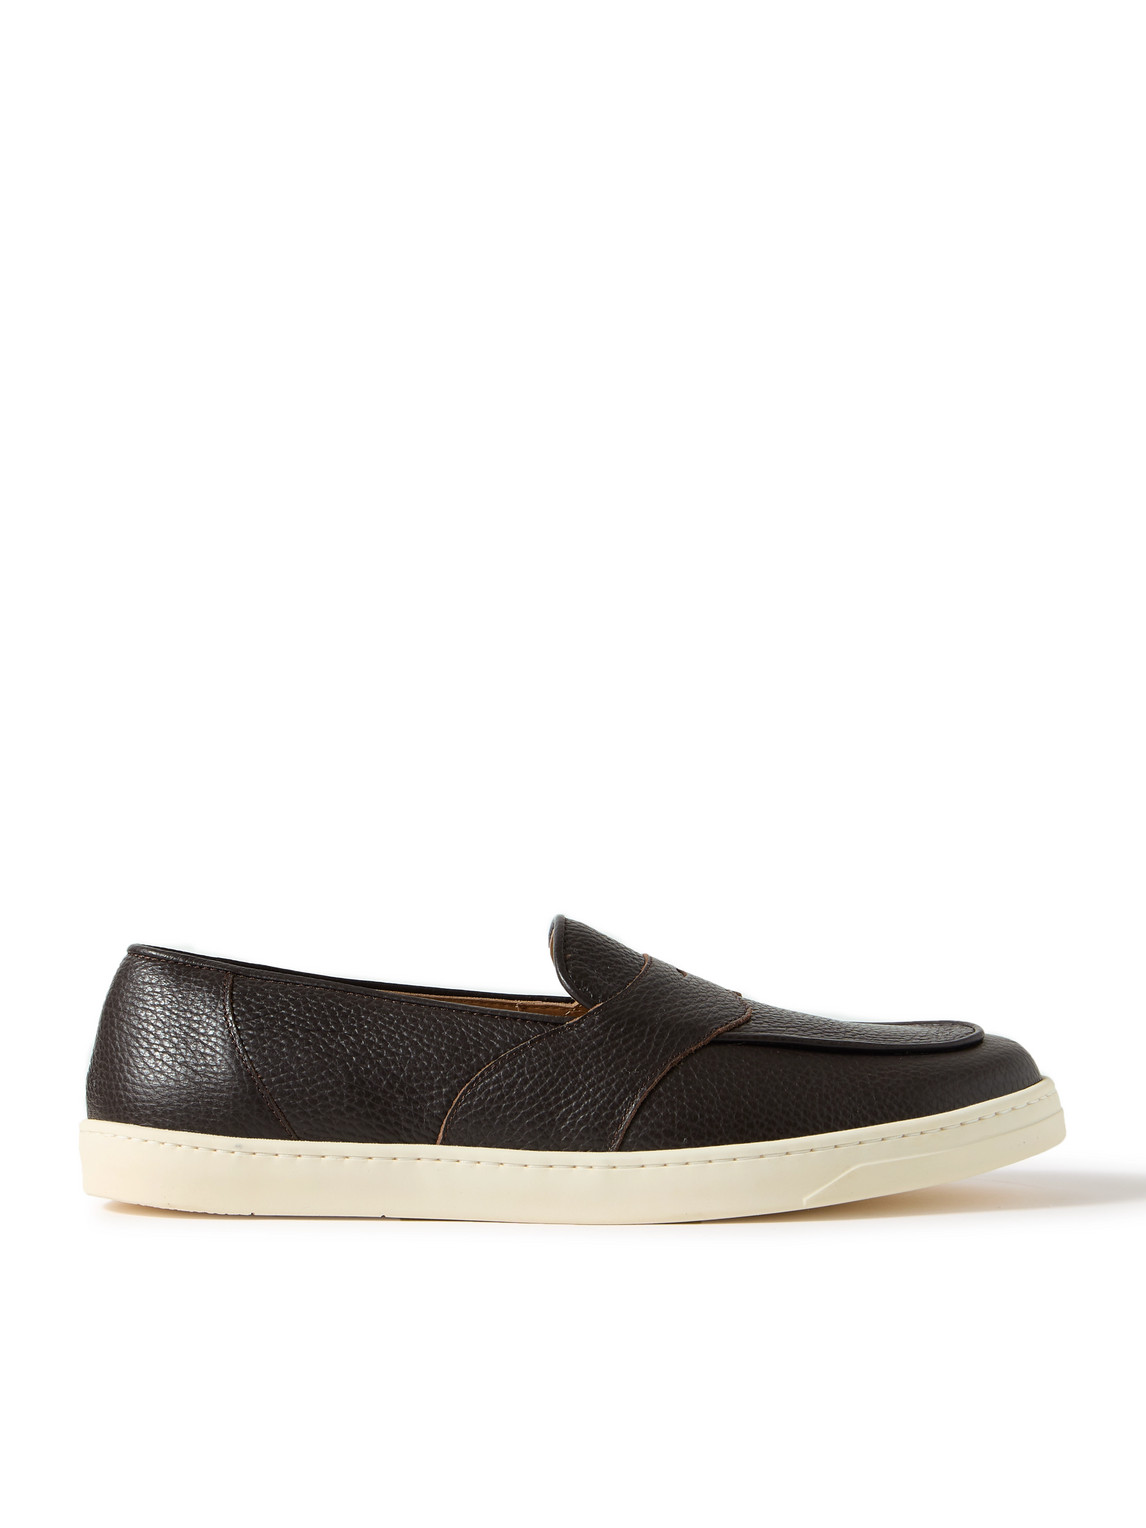 Joey Full-Grain Leather Penny Loafers